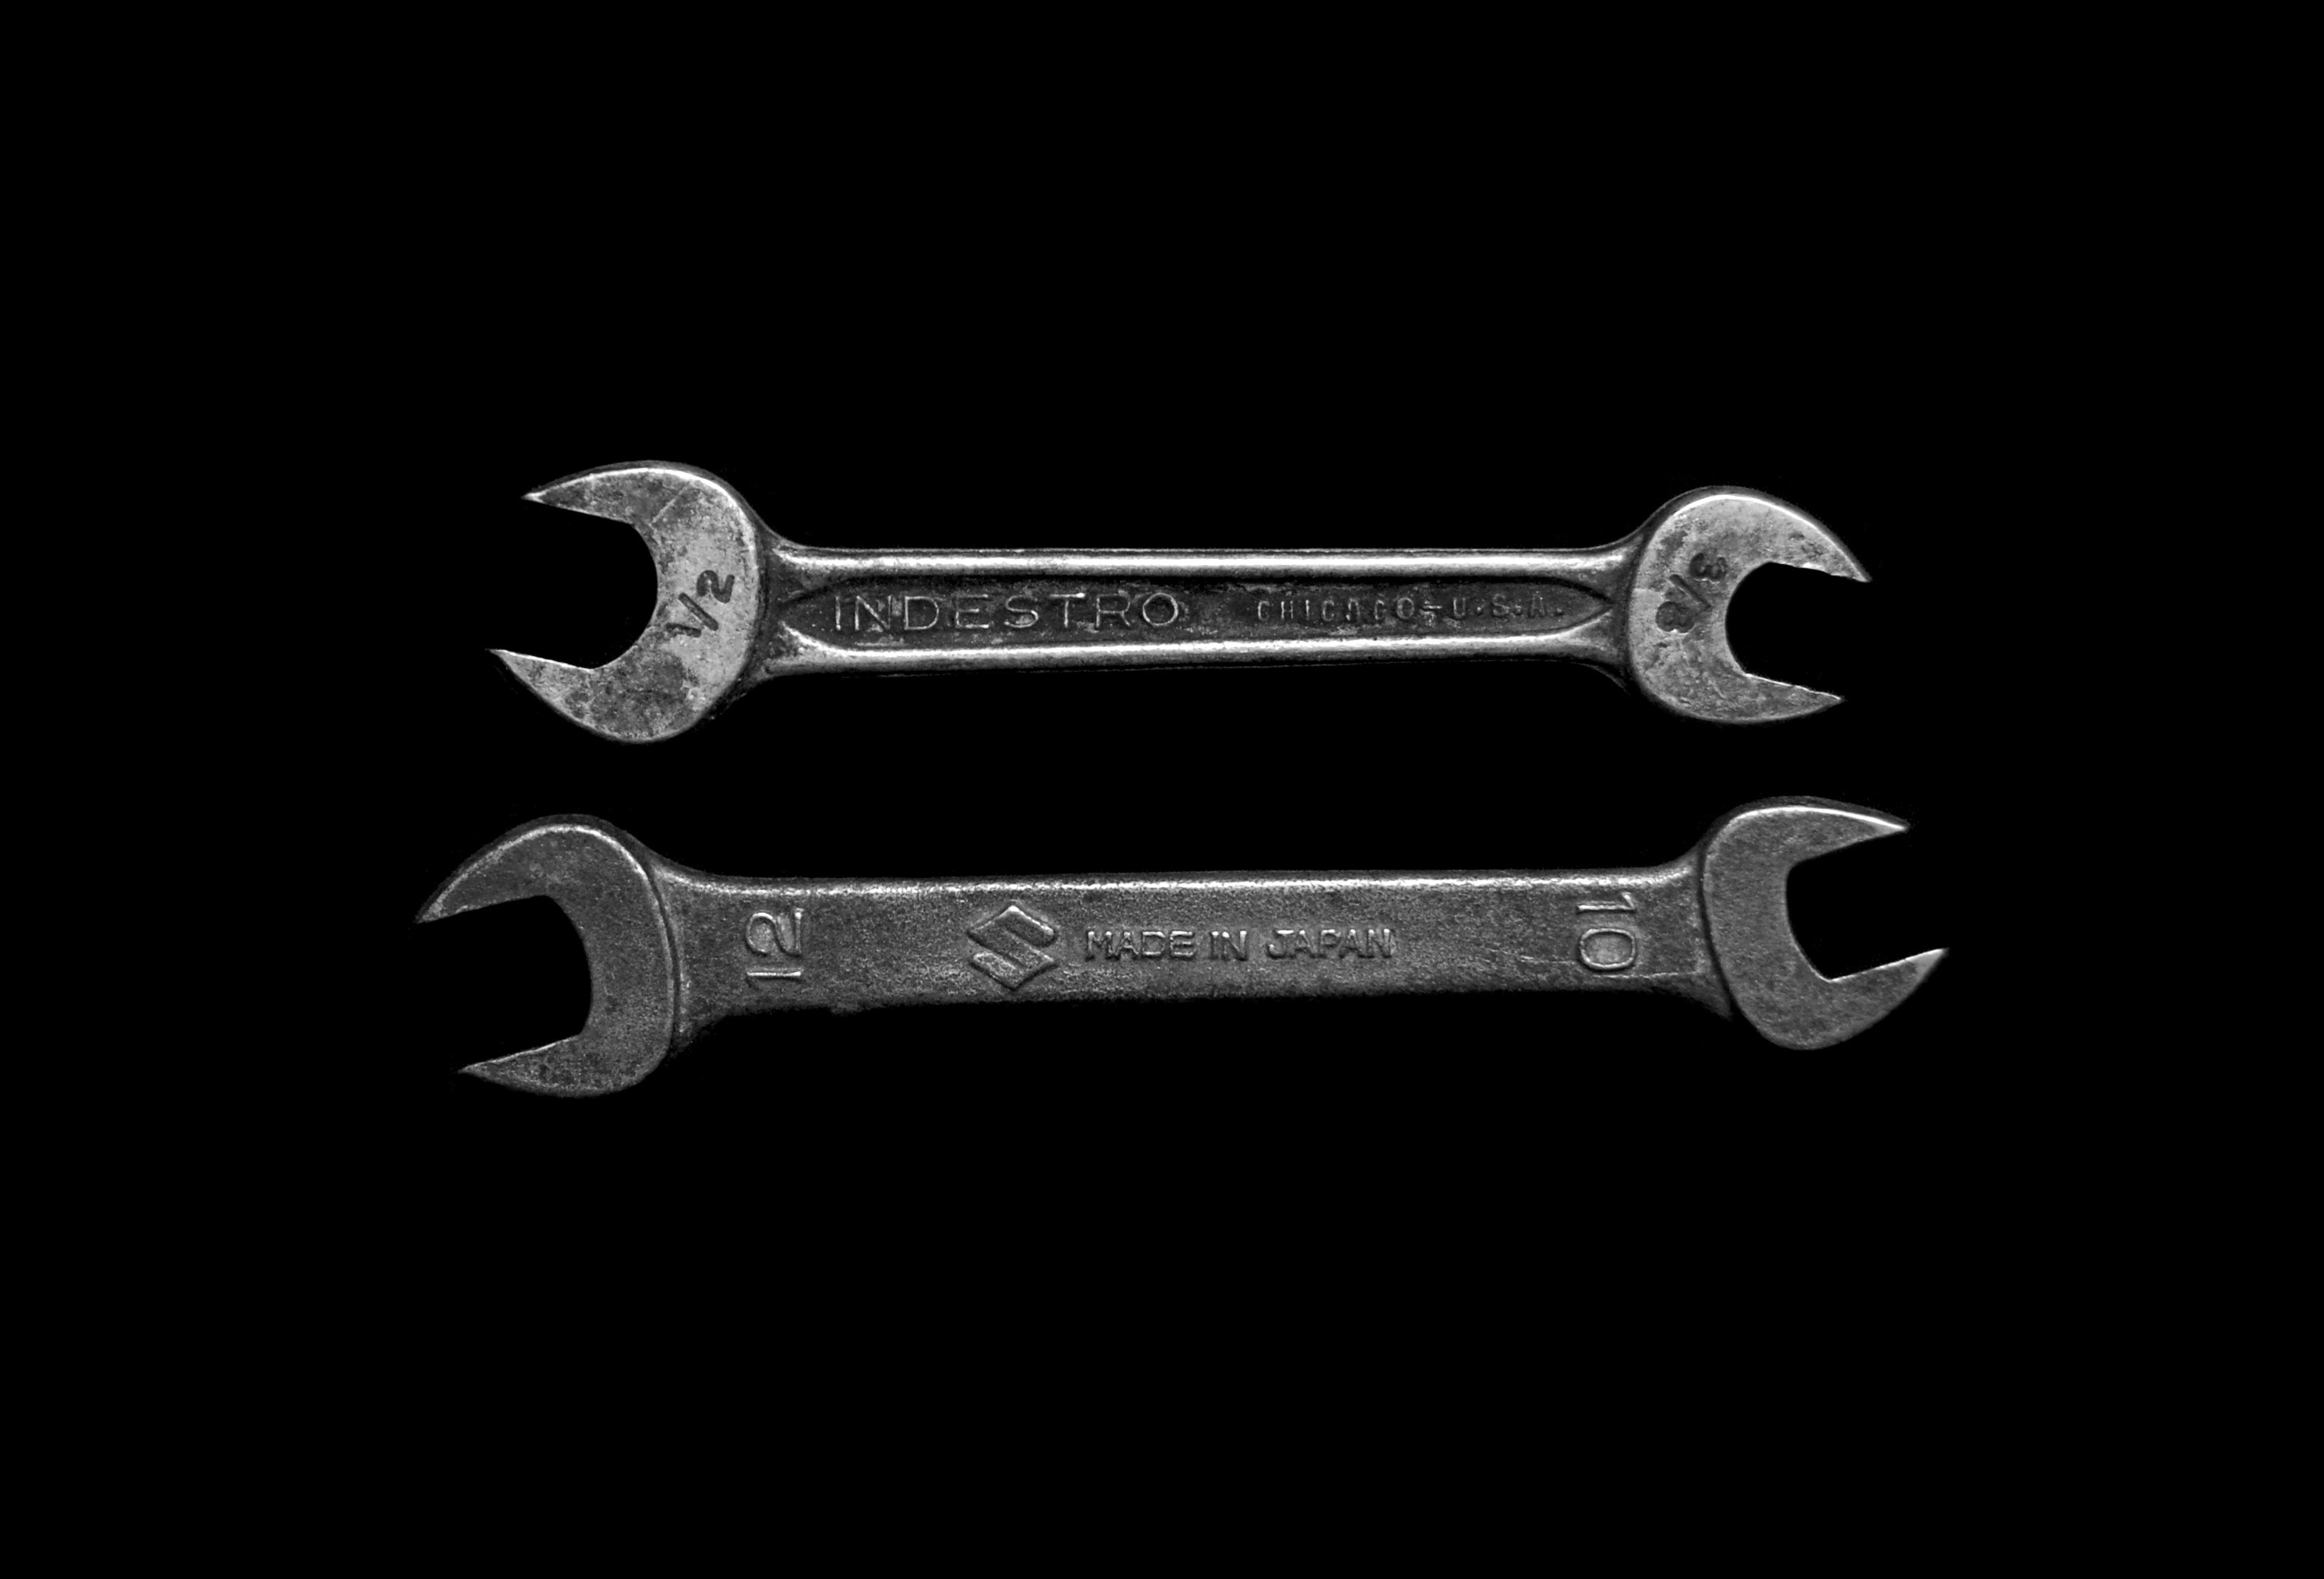 two old-fashioned box wrenches against a dark background